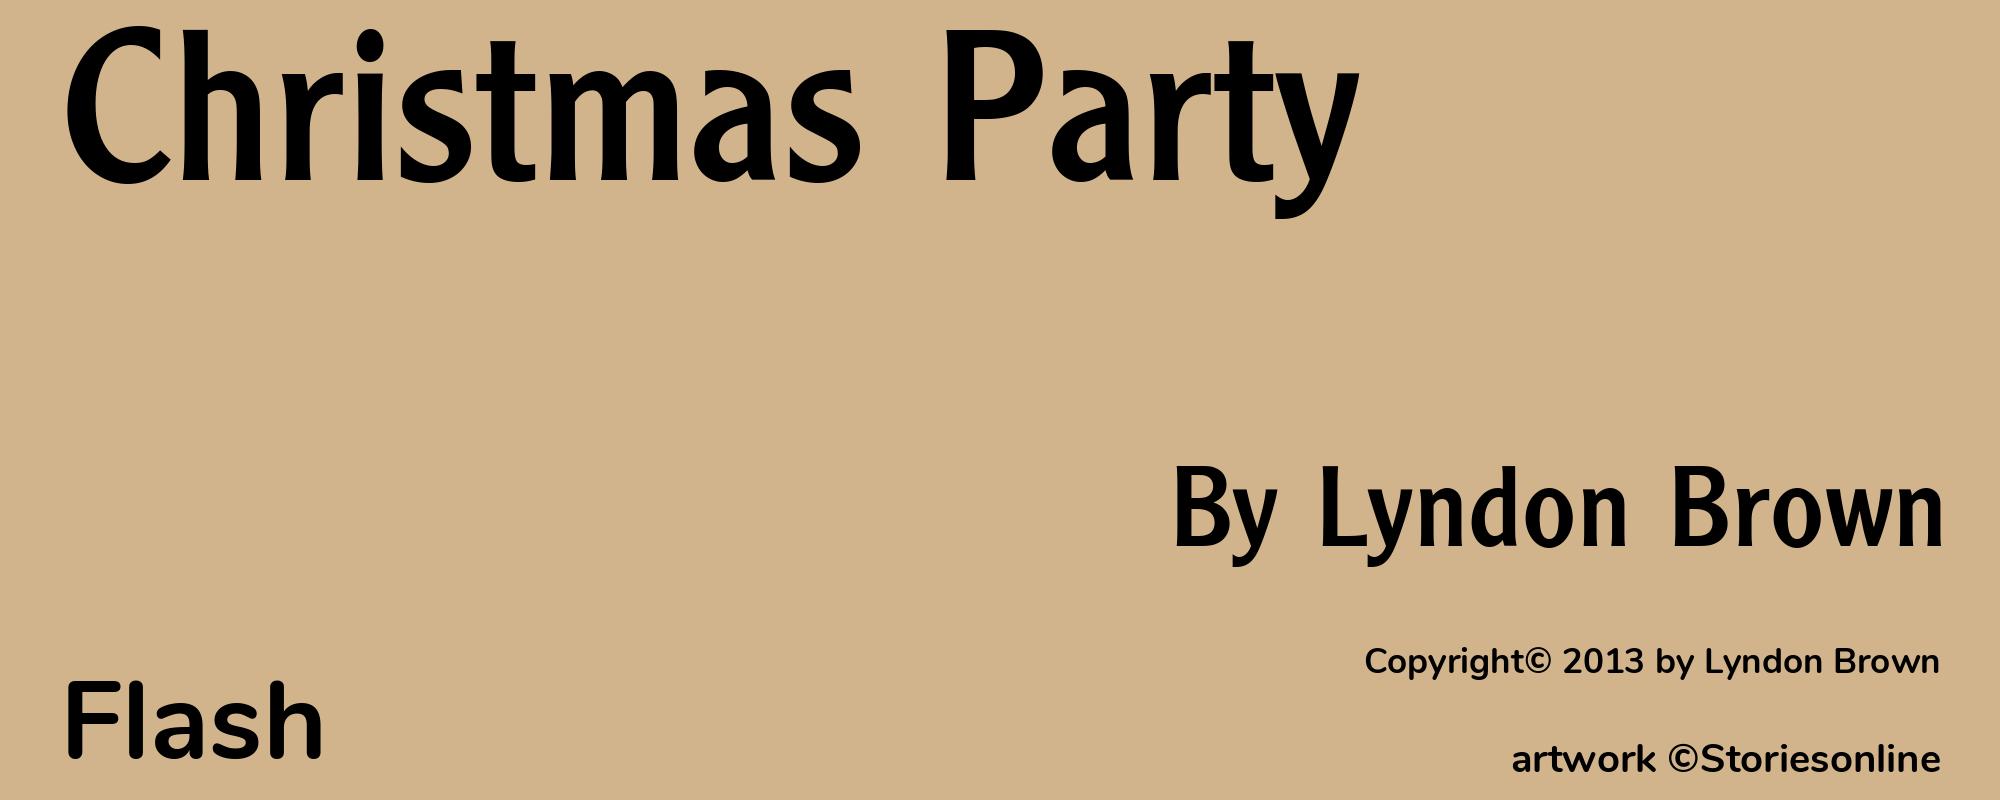 Christmas Party - Cover